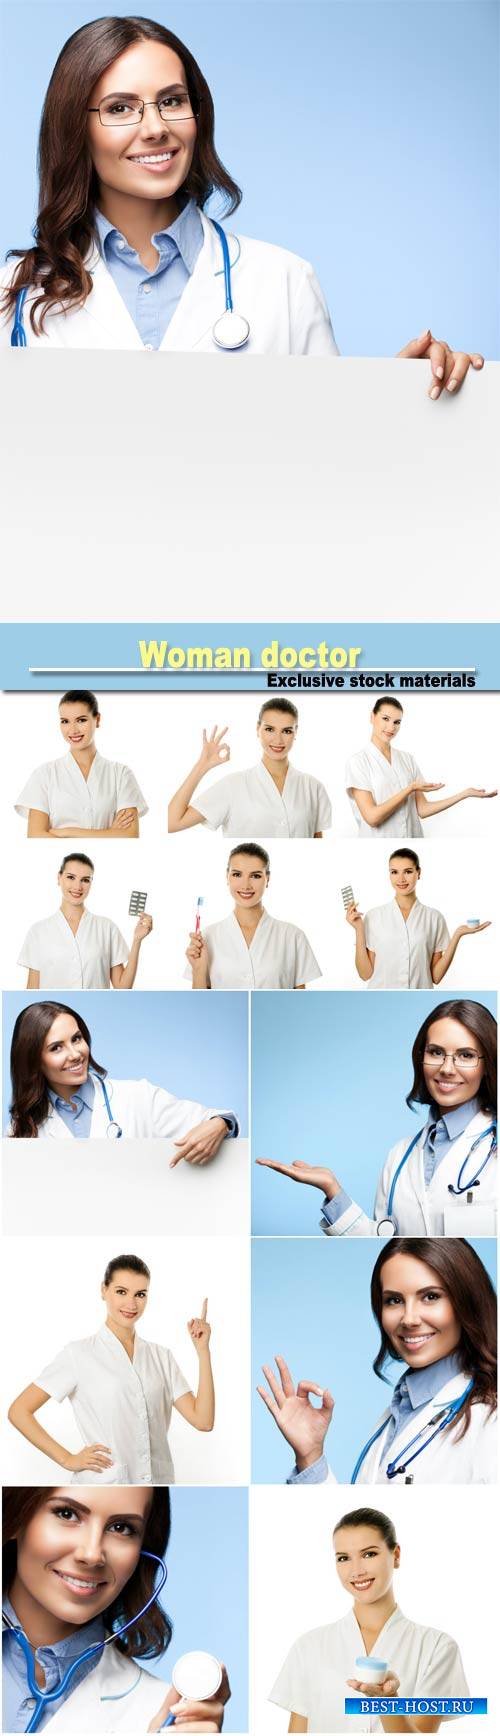 Woman doctor in different positions